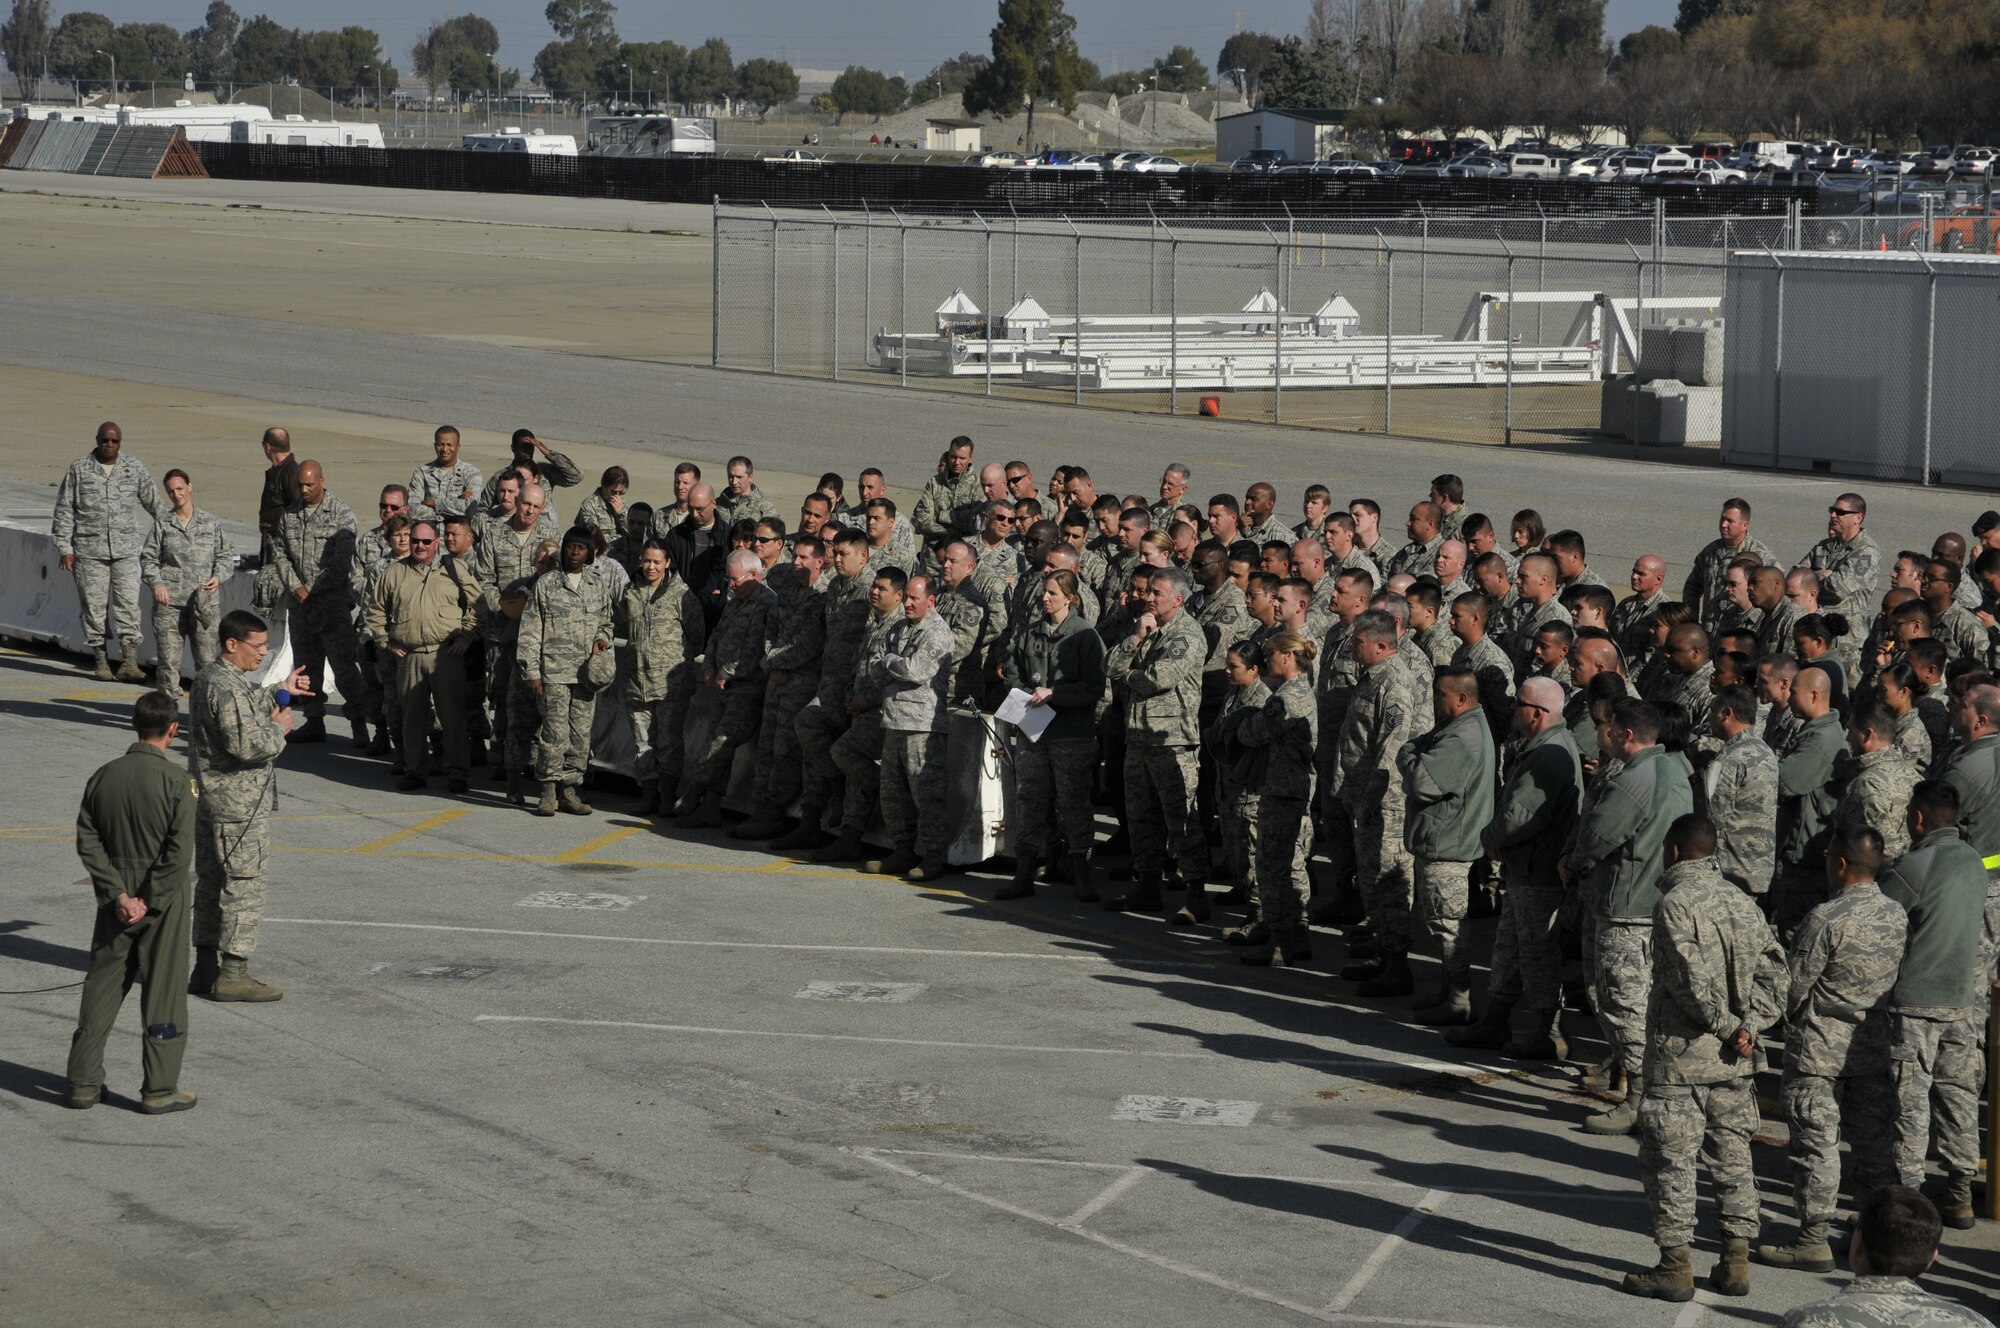 Brig. Gen. James C. Witham, commander of the California Air National Guard, conducts a town hall meeting with 129th Rescue Wing Airmen at Moffett Federal Airfield, Calif., Feb. 4, 2012. This is Witham’s first visit to the 129th since becoming the CA ANG commander and it gave Airmen an opportunity to ask questions about the future of the Guard. (Air National Guard photo by Staff Sgt. Kim E. Ramirez) 